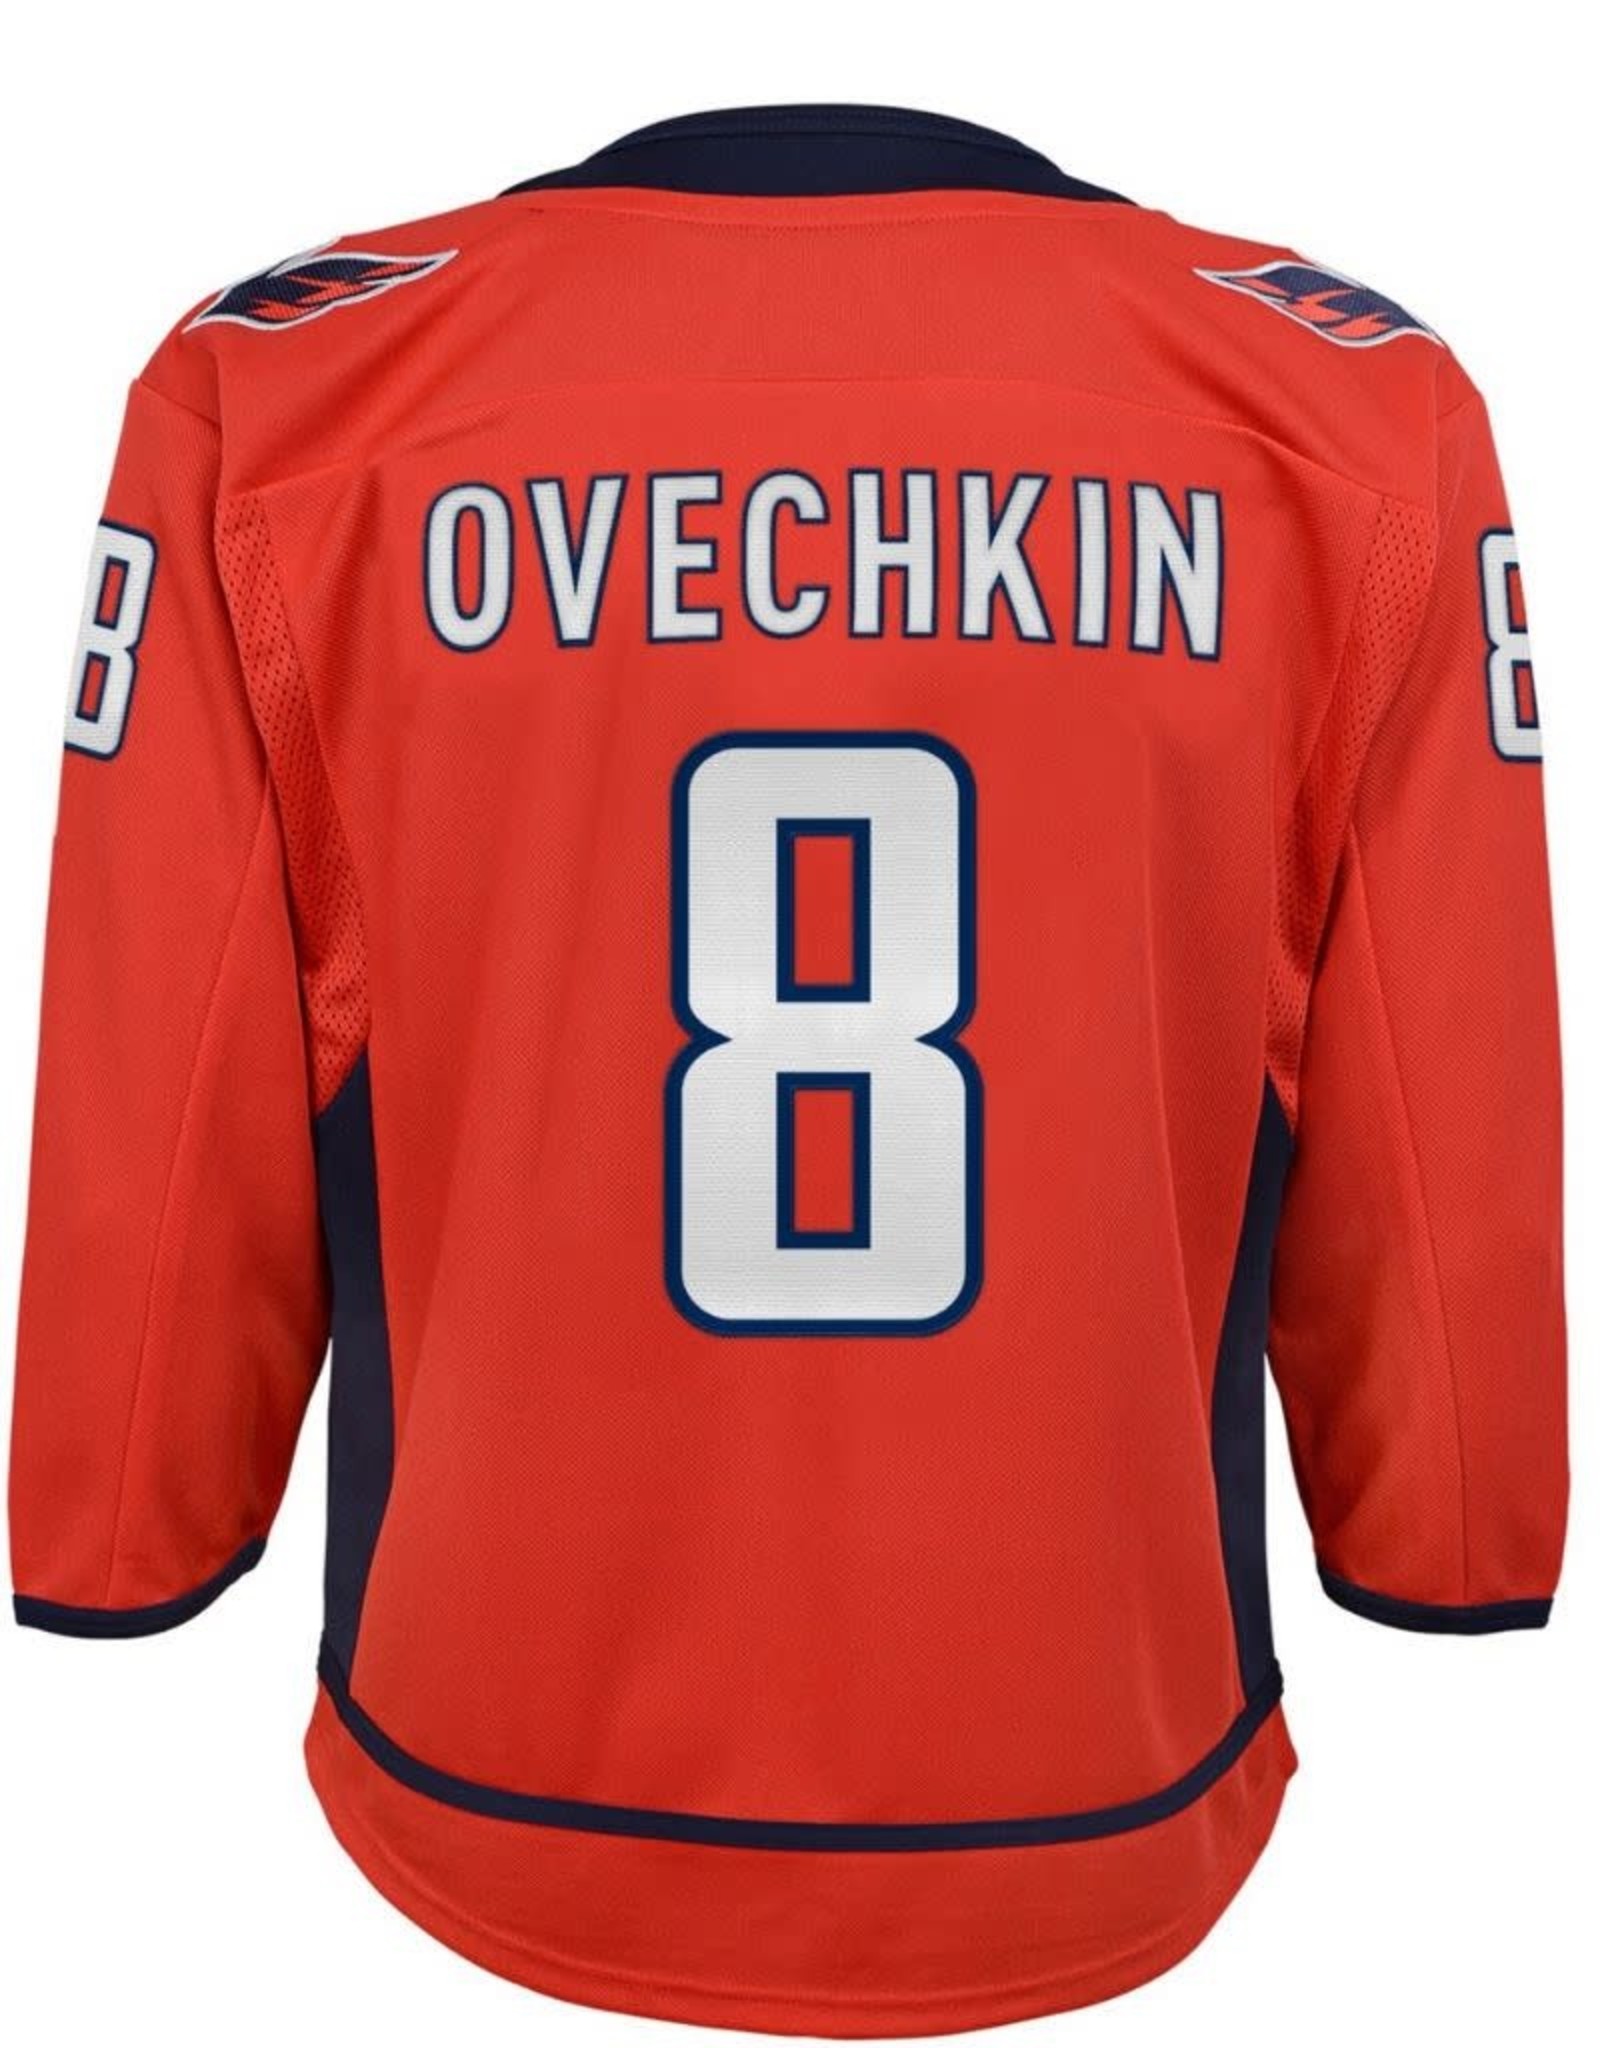 NHL Youth Premier Home Ovechkin #8 